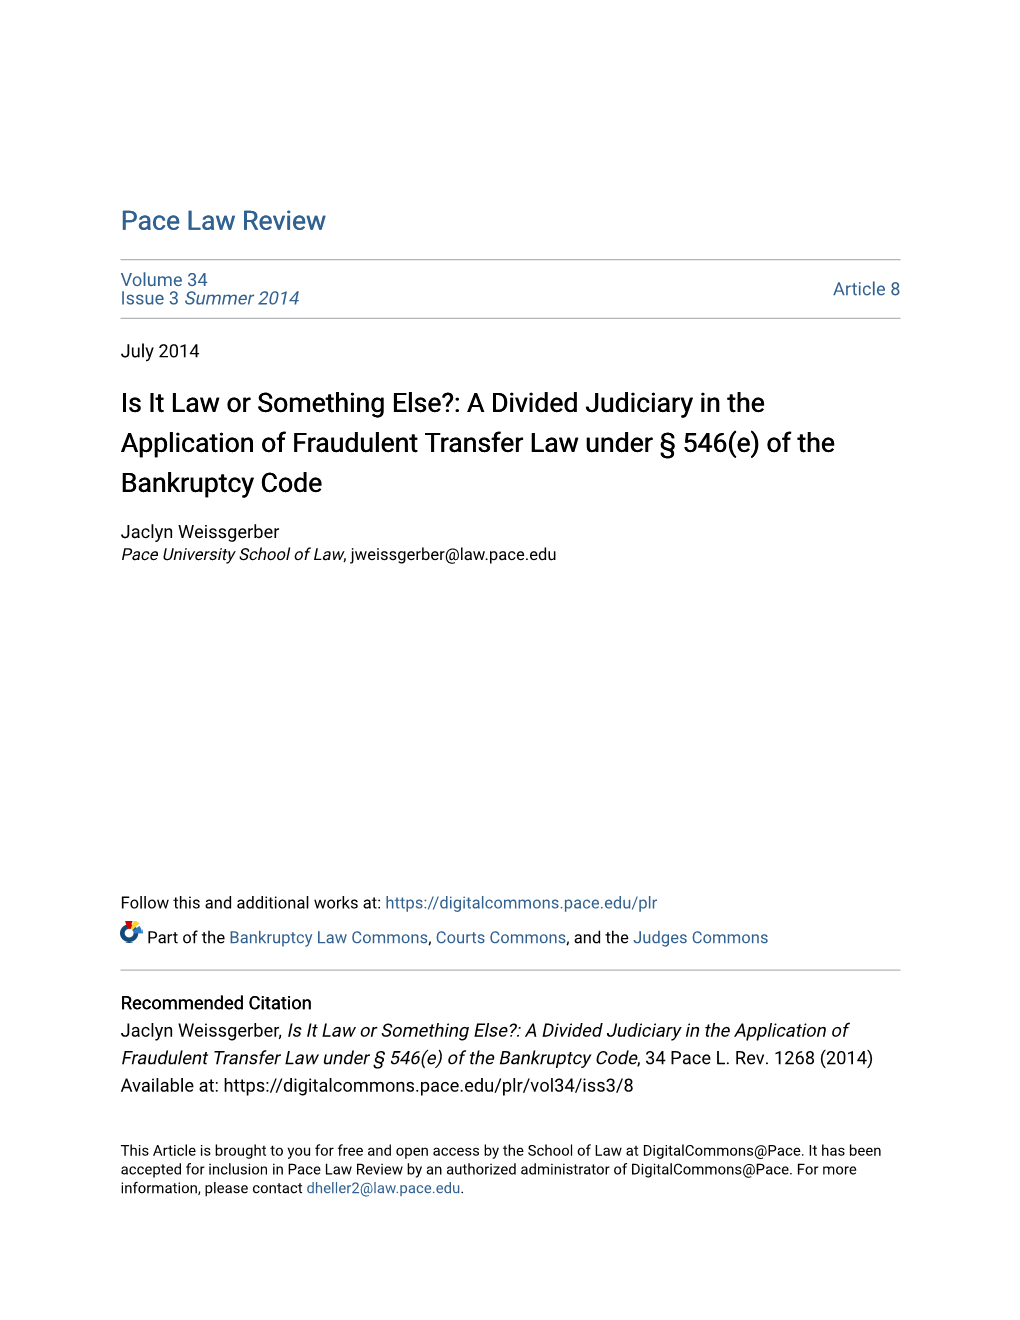 A Divided Judiciary in the Application of Fraudulent Transfer Law Under § 546(E) of the Bankruptcy Code